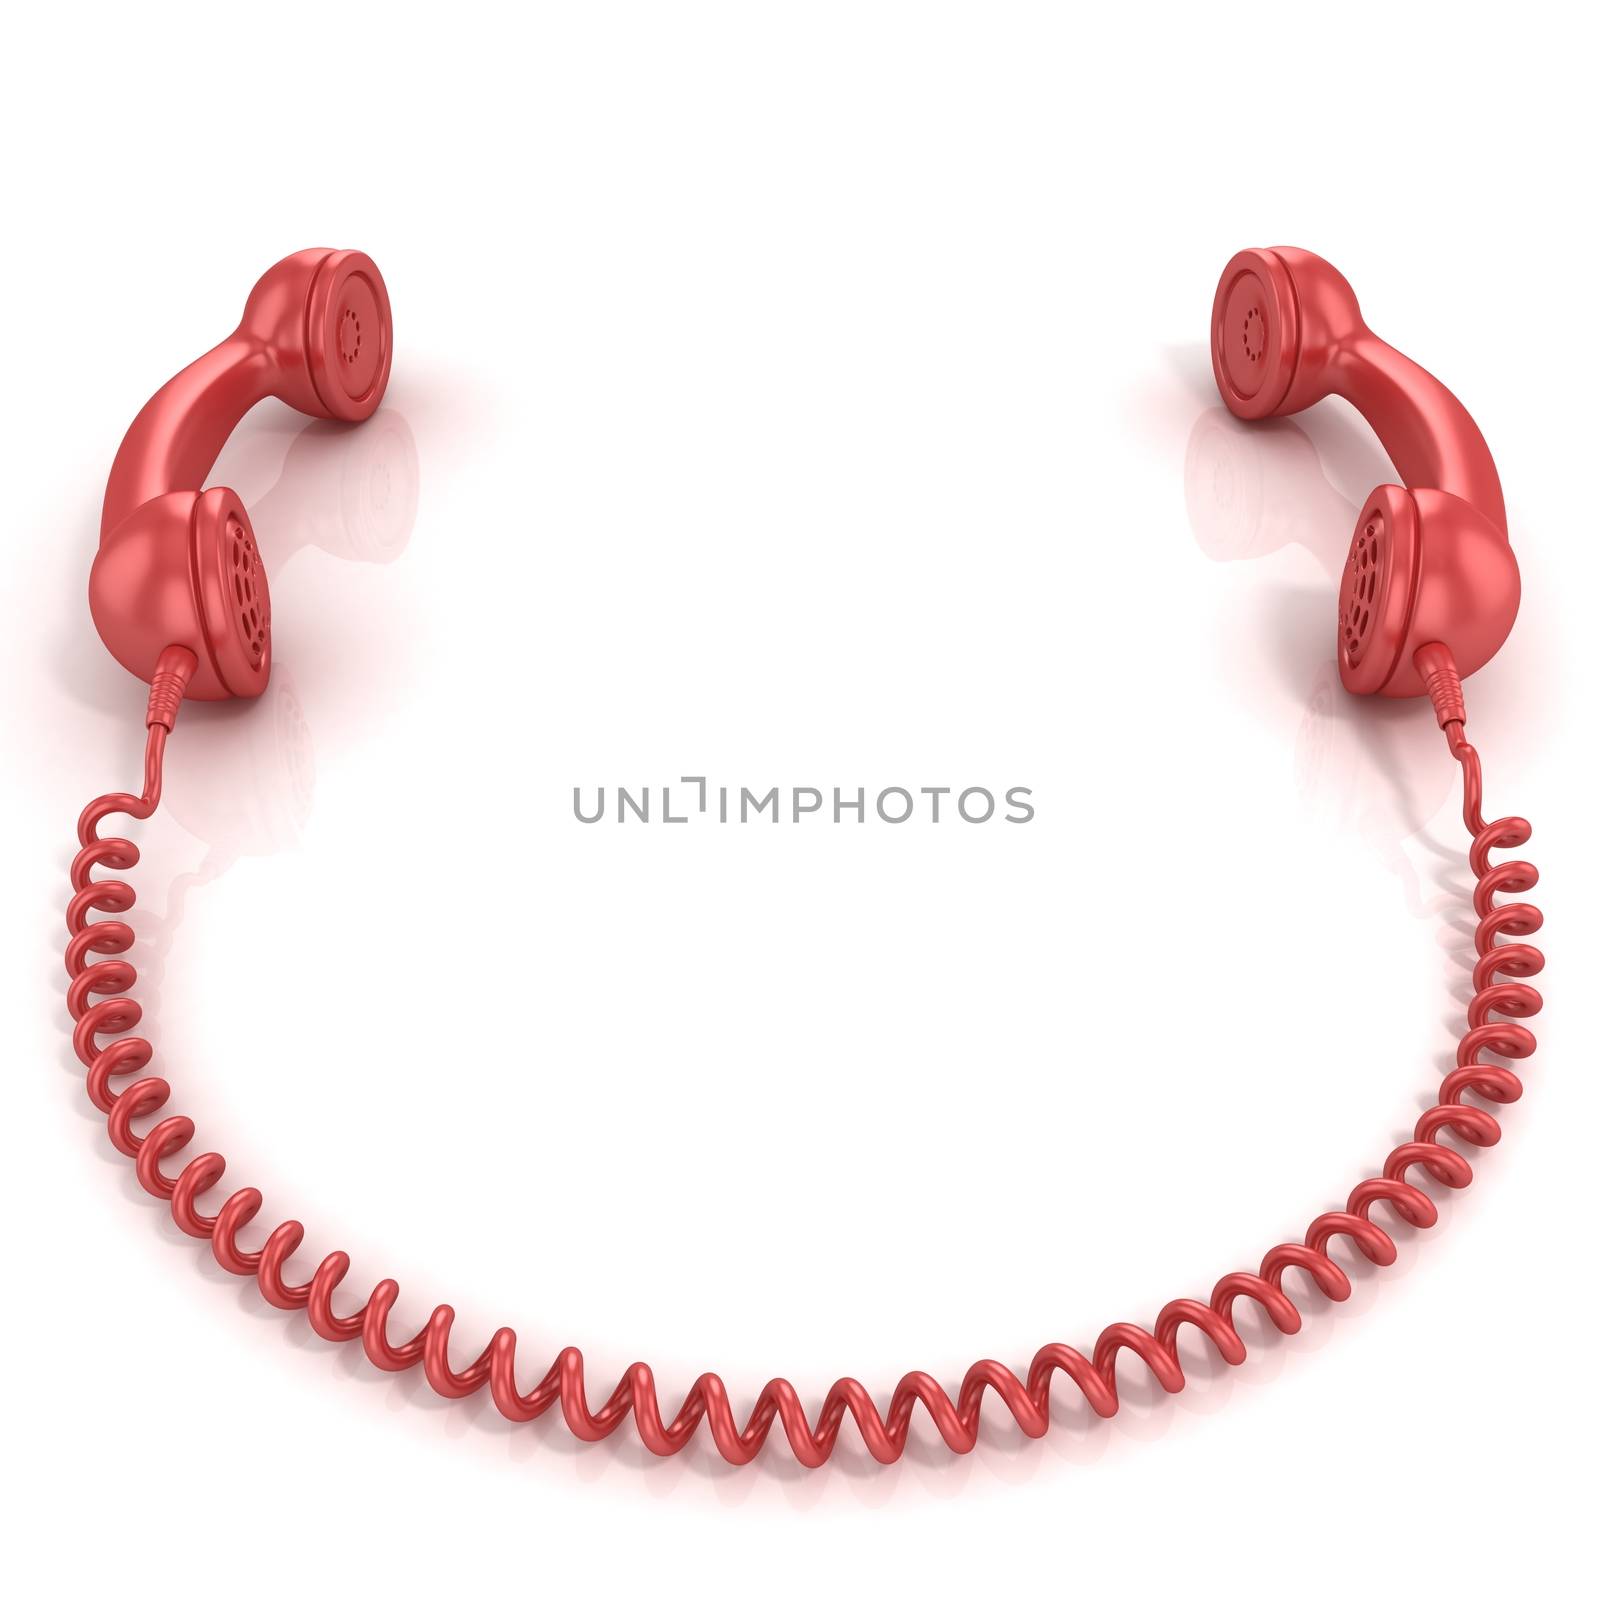 Red old fashion phone handsets connected isolated on white background